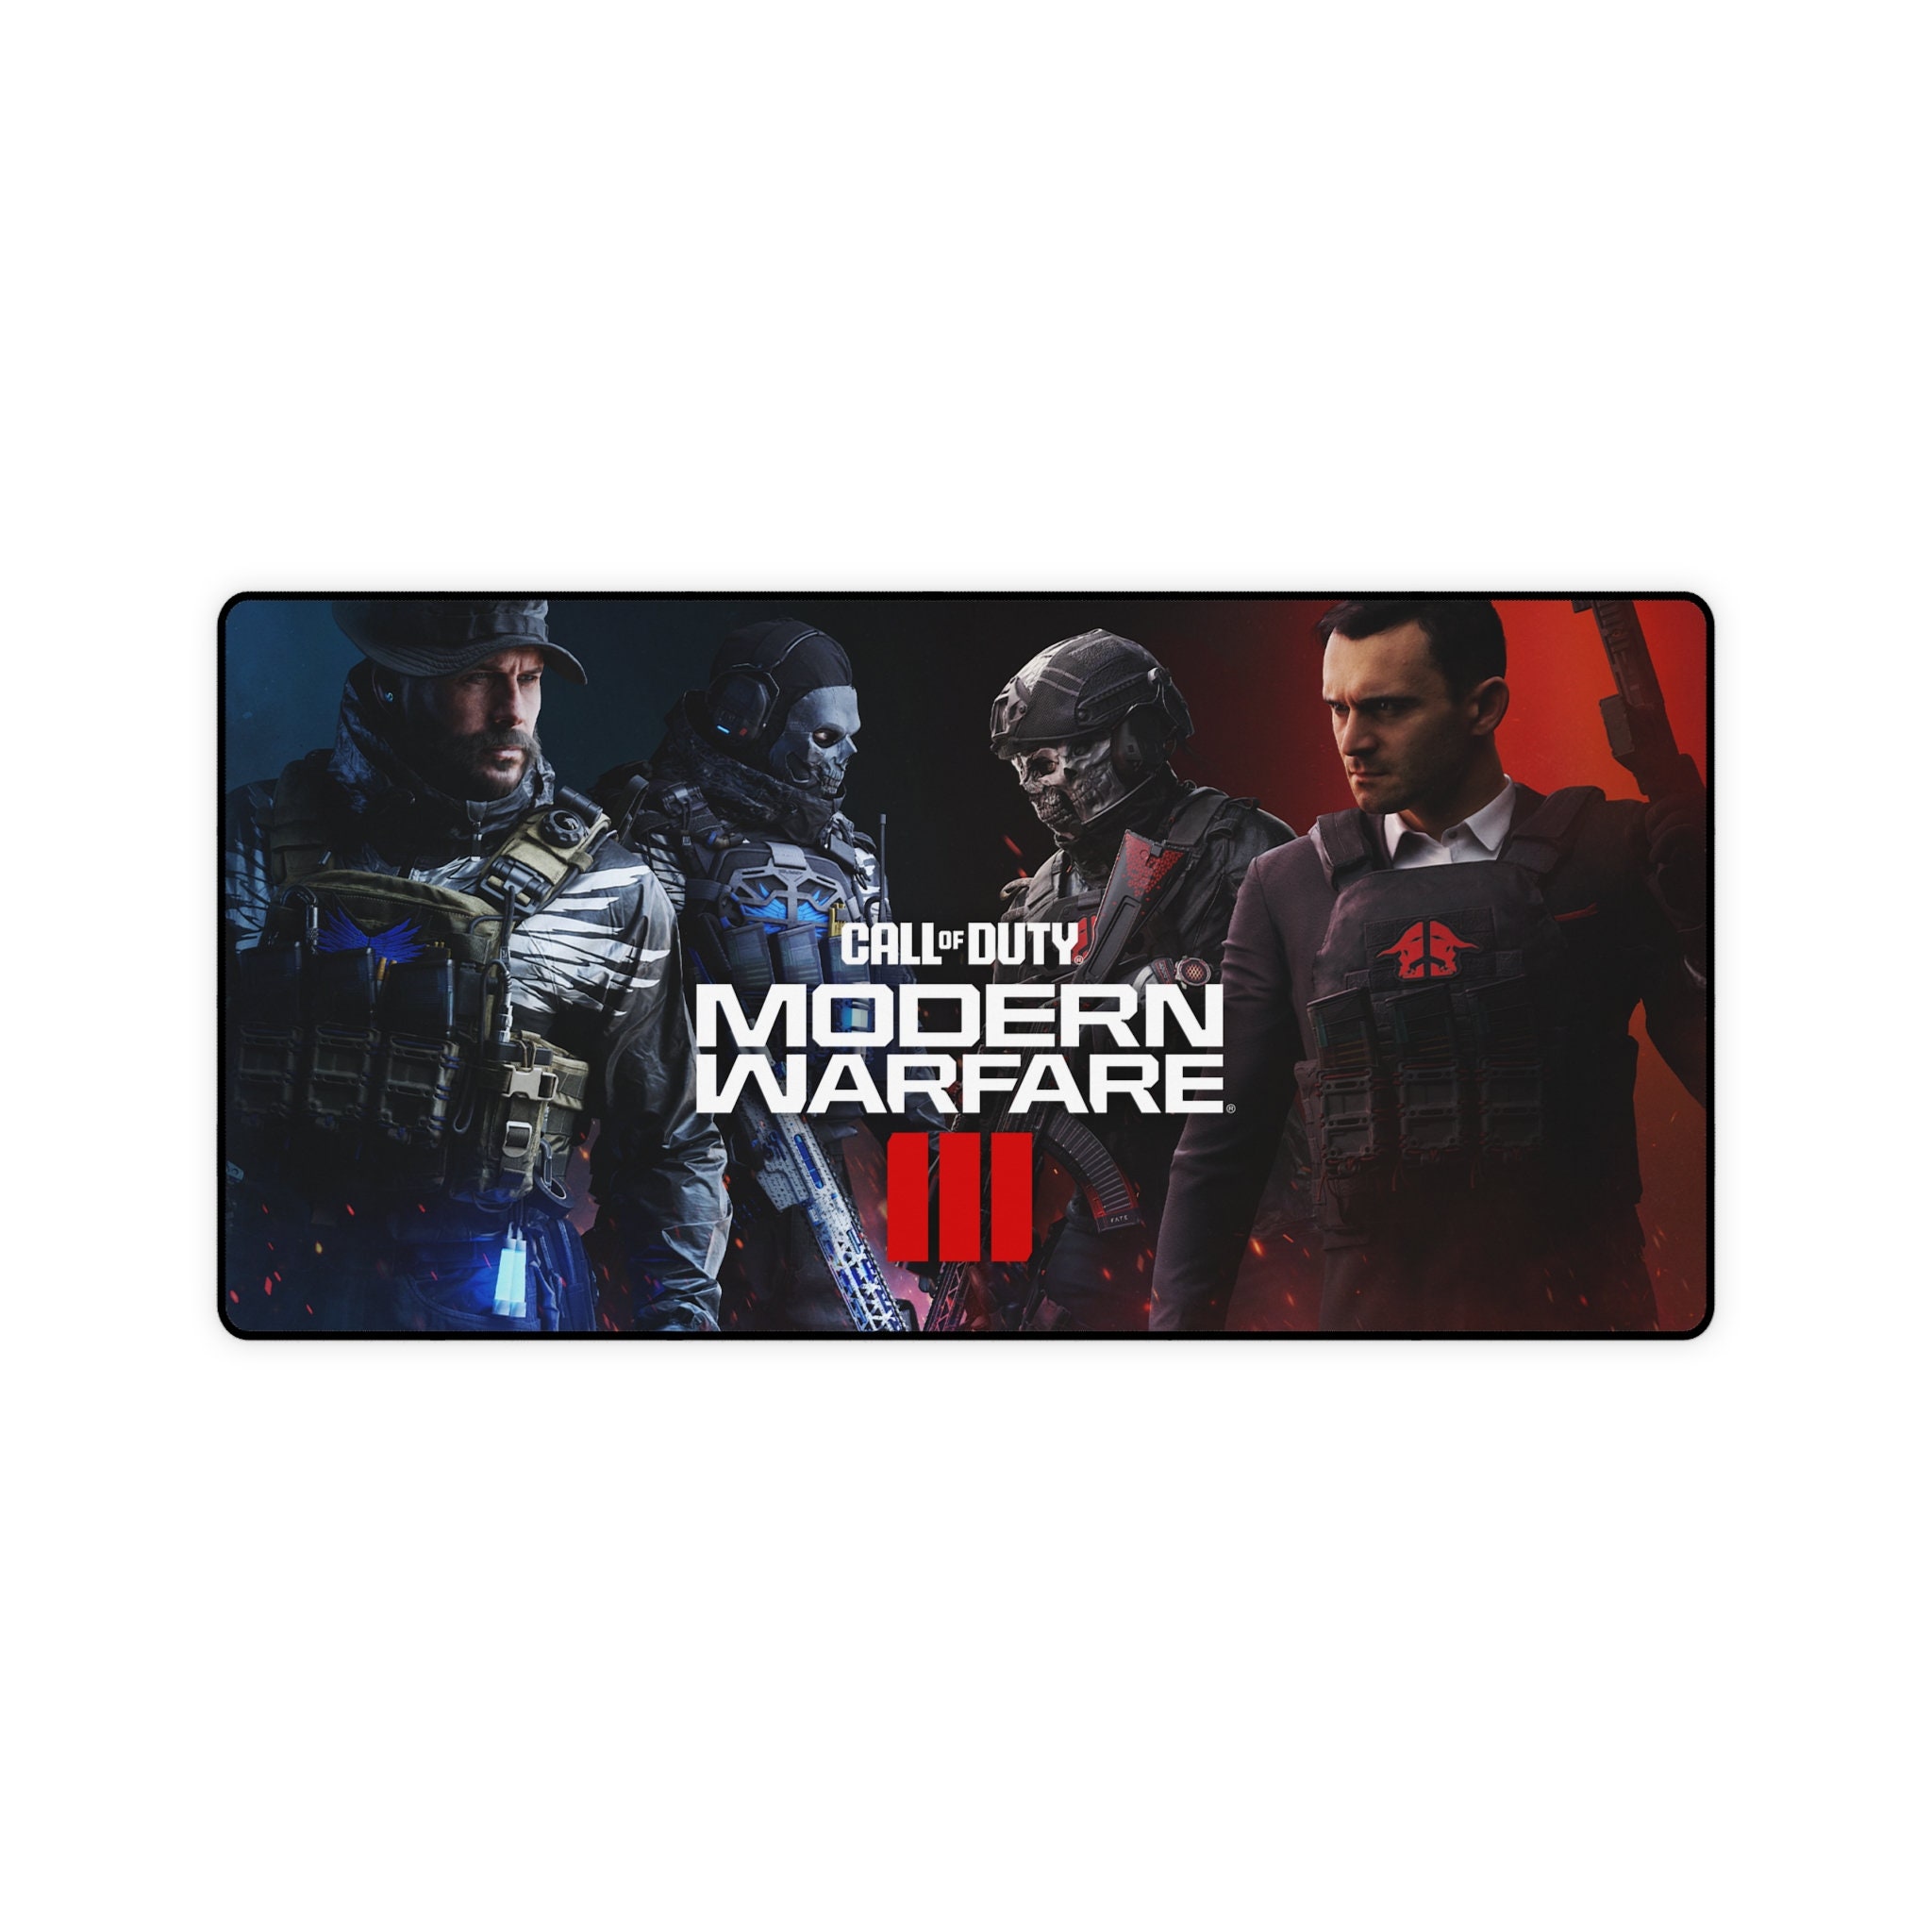 EUREKA ERGONOMIC & Call of Duty Modern Warfare Captain Price Gaming Mouse  Pad, Extended XXL Large Black Home Office Computer Desk Accessories  Keyboard